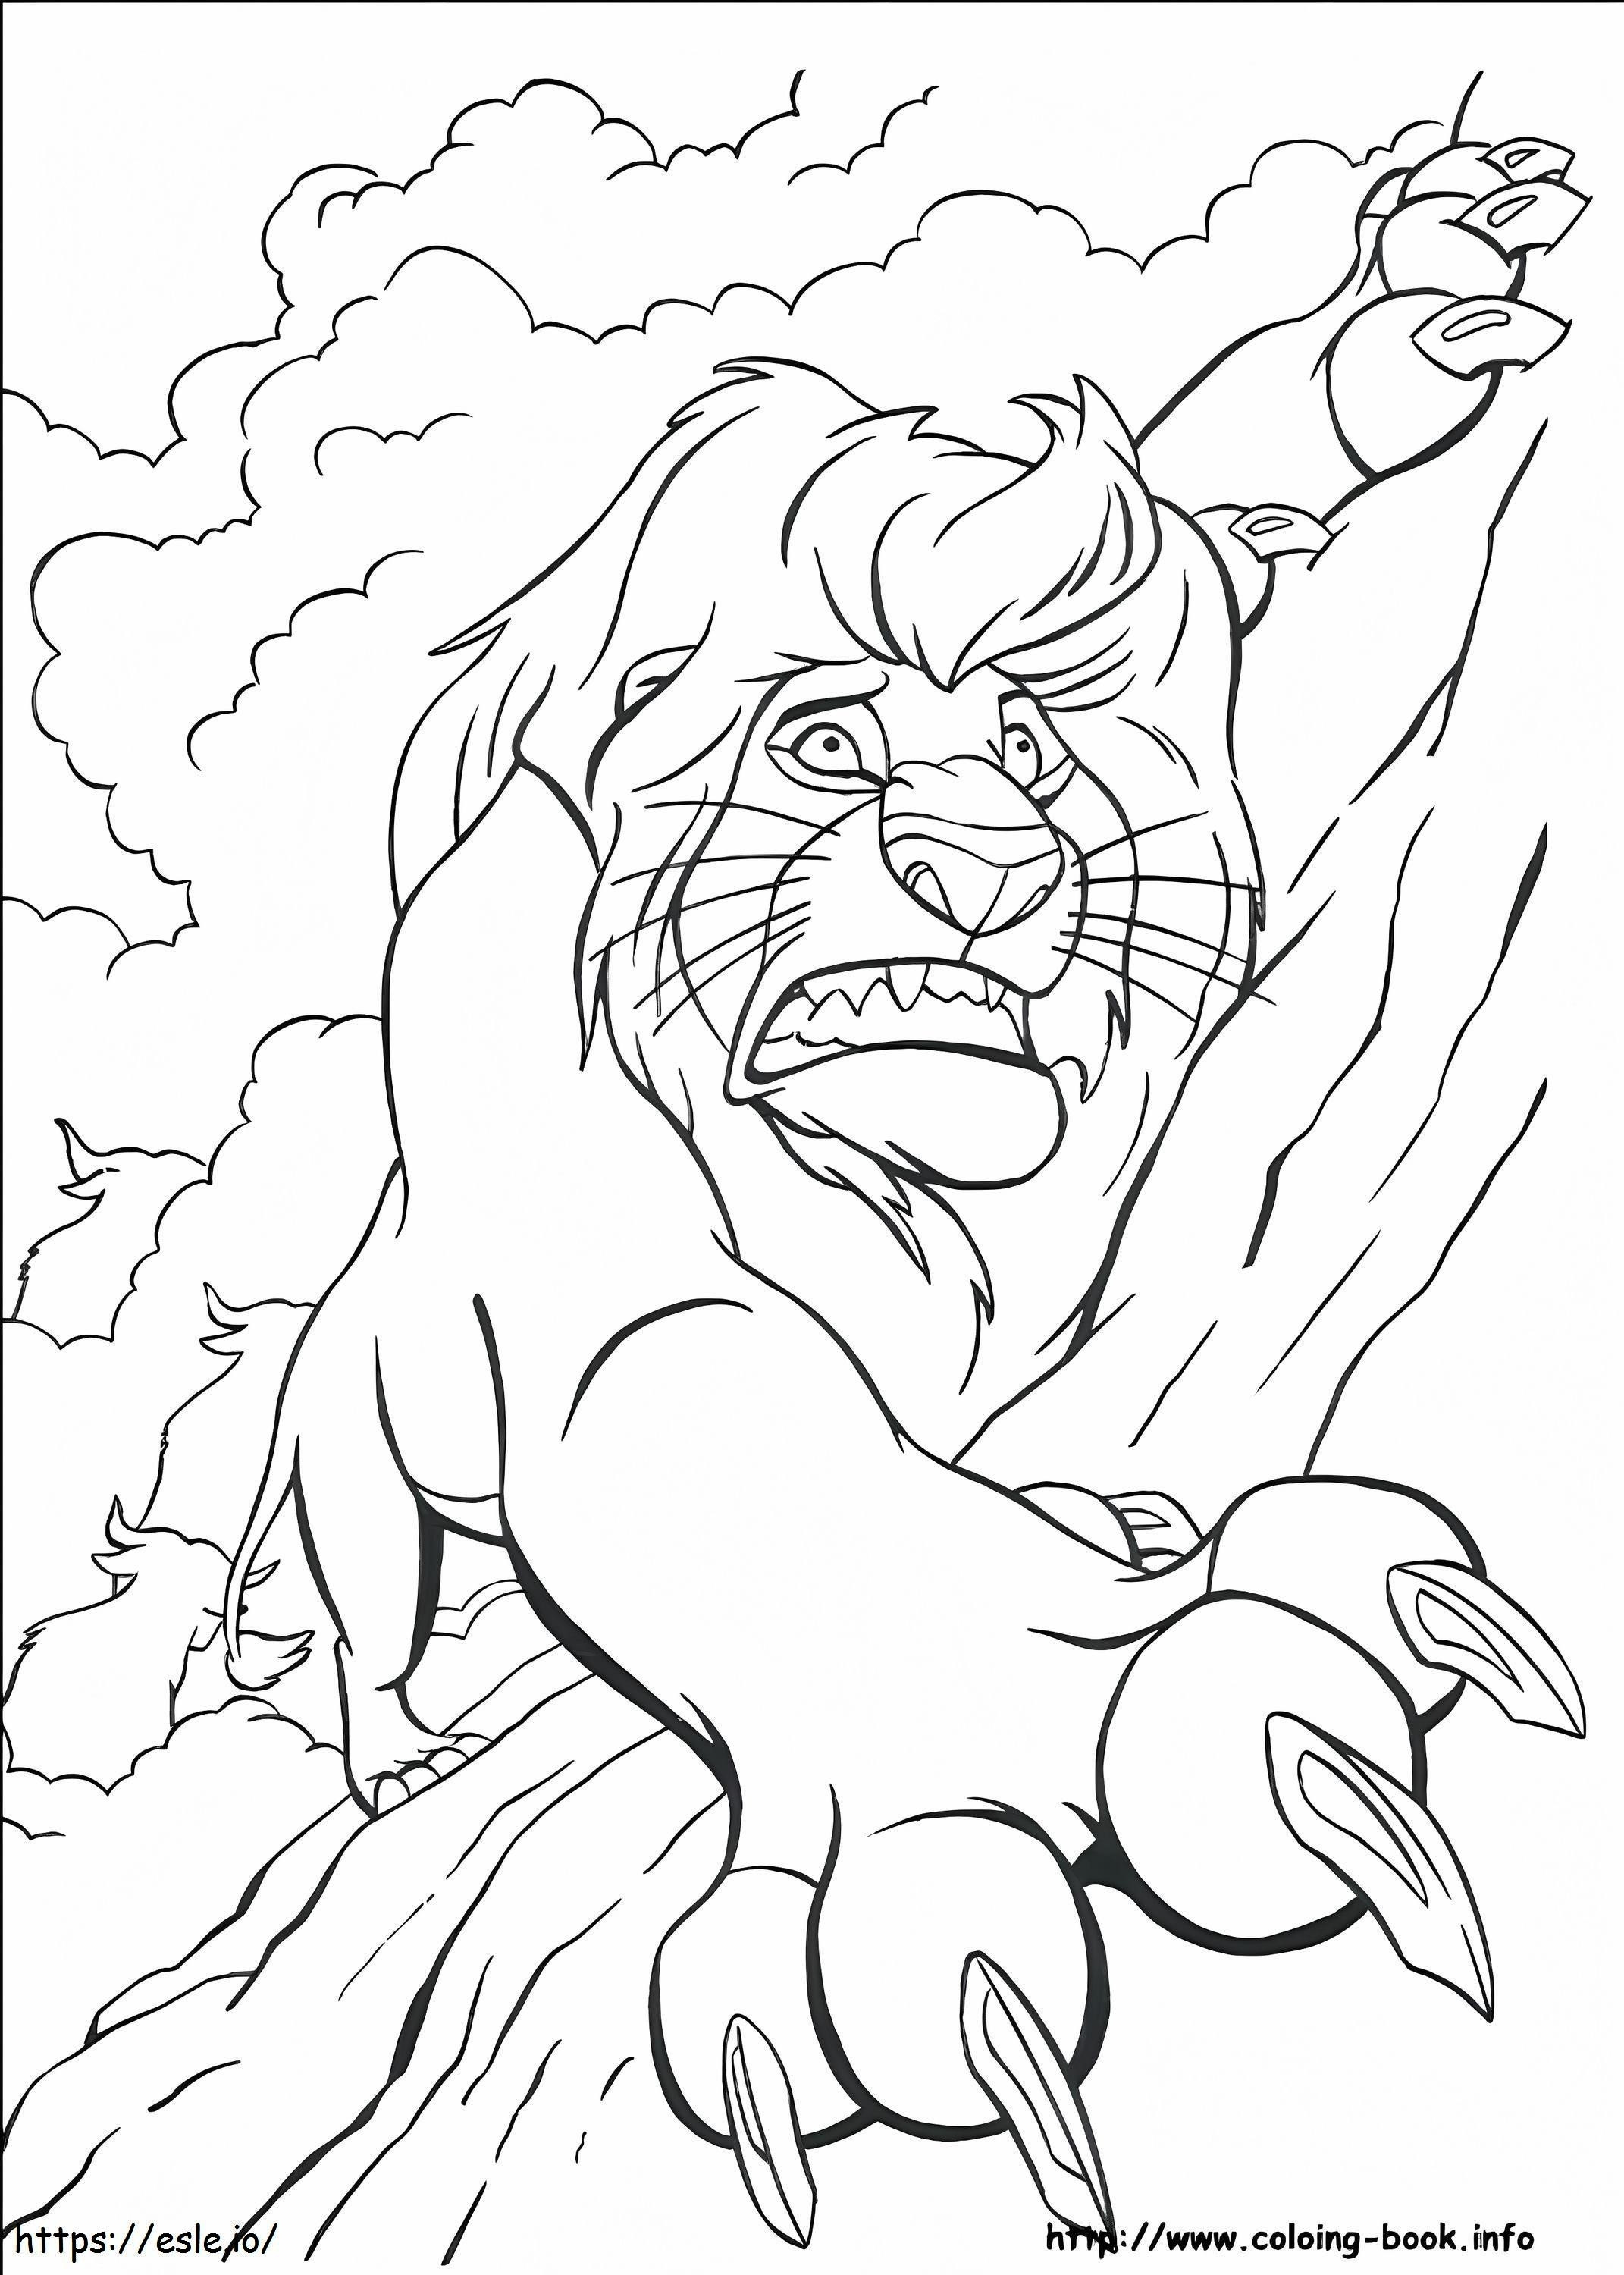 1539403410 The Lion King On Book For 2 Online Game coloring page